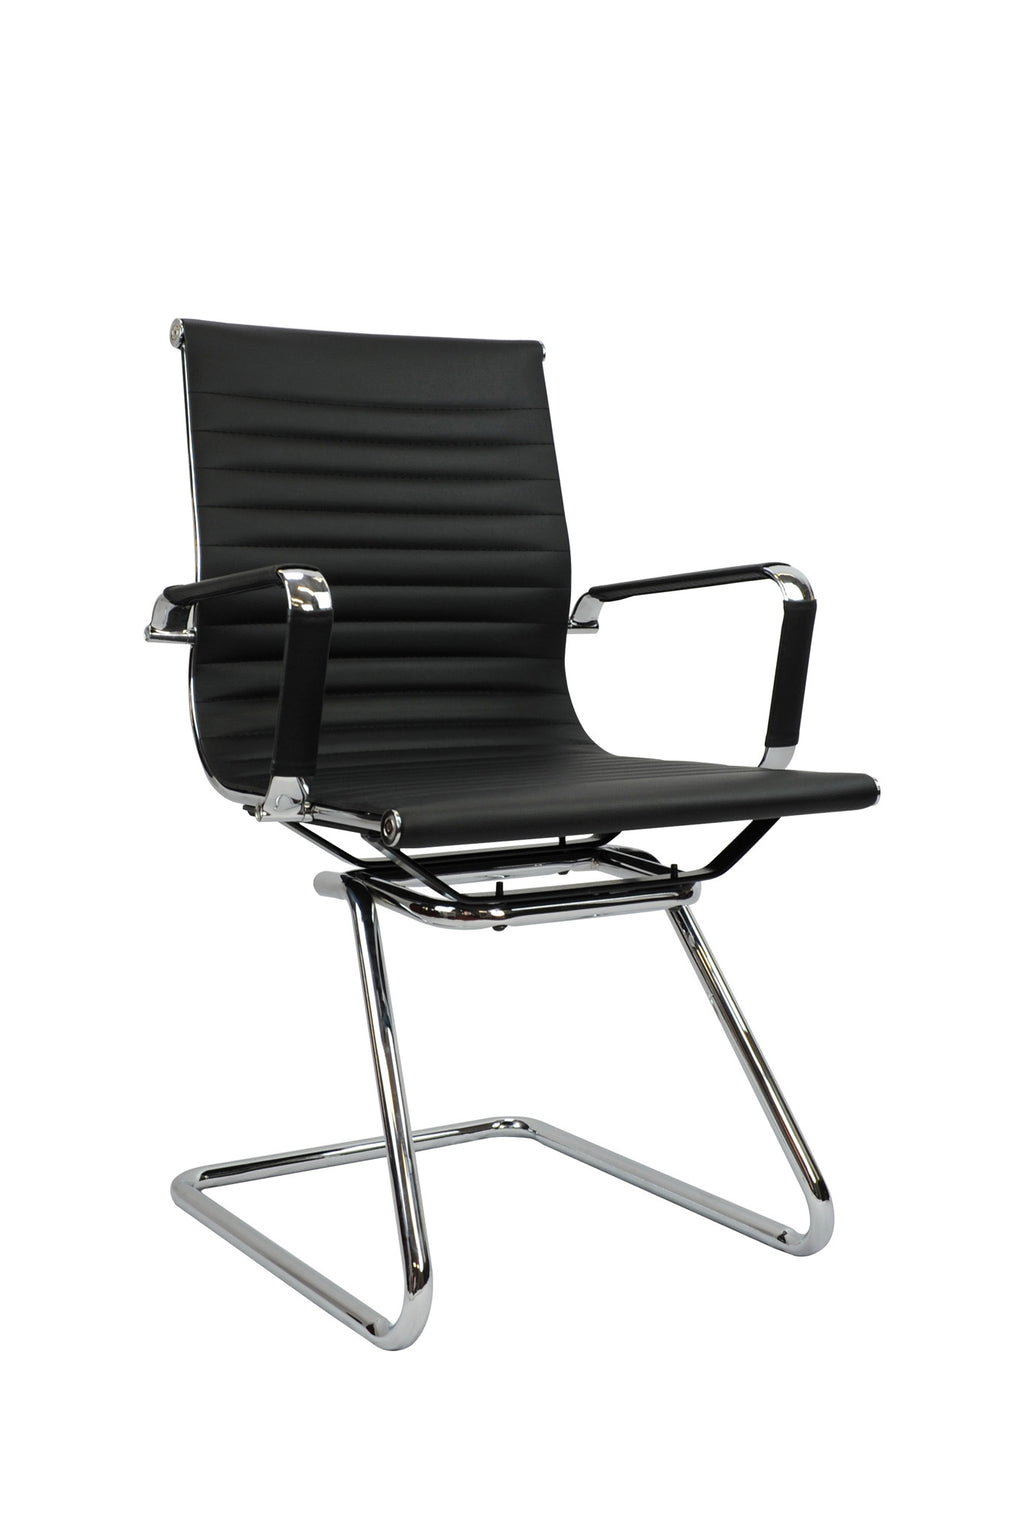 Aero Cantilever visitor chair - Best Guest Chair in Australia